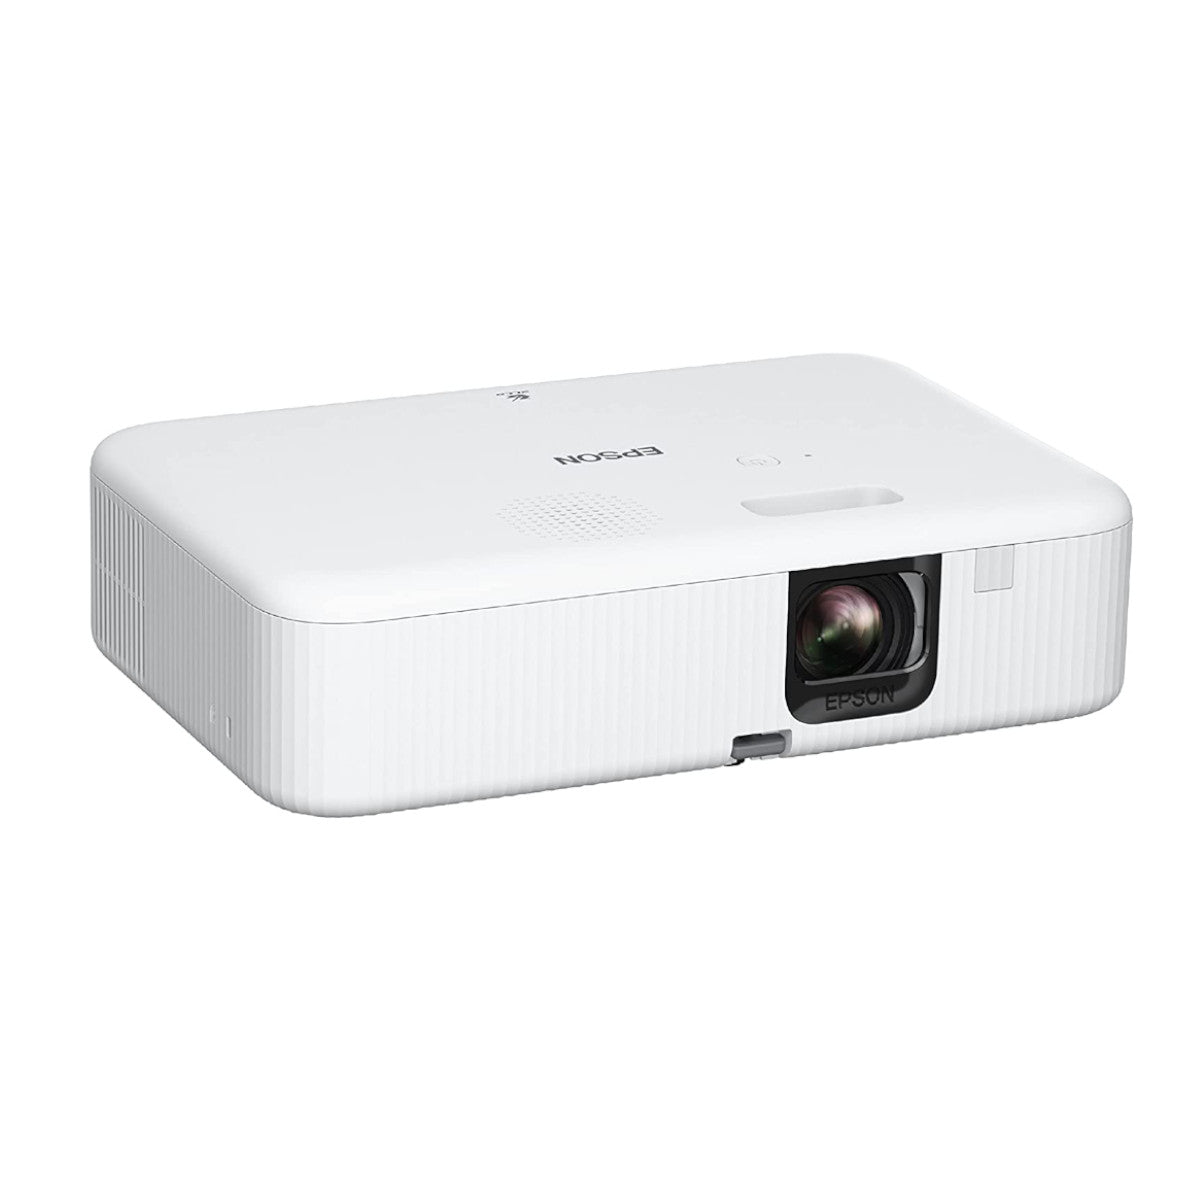 Epson CO-FH02 Smart Full HD Home Projector - Ooberpad India